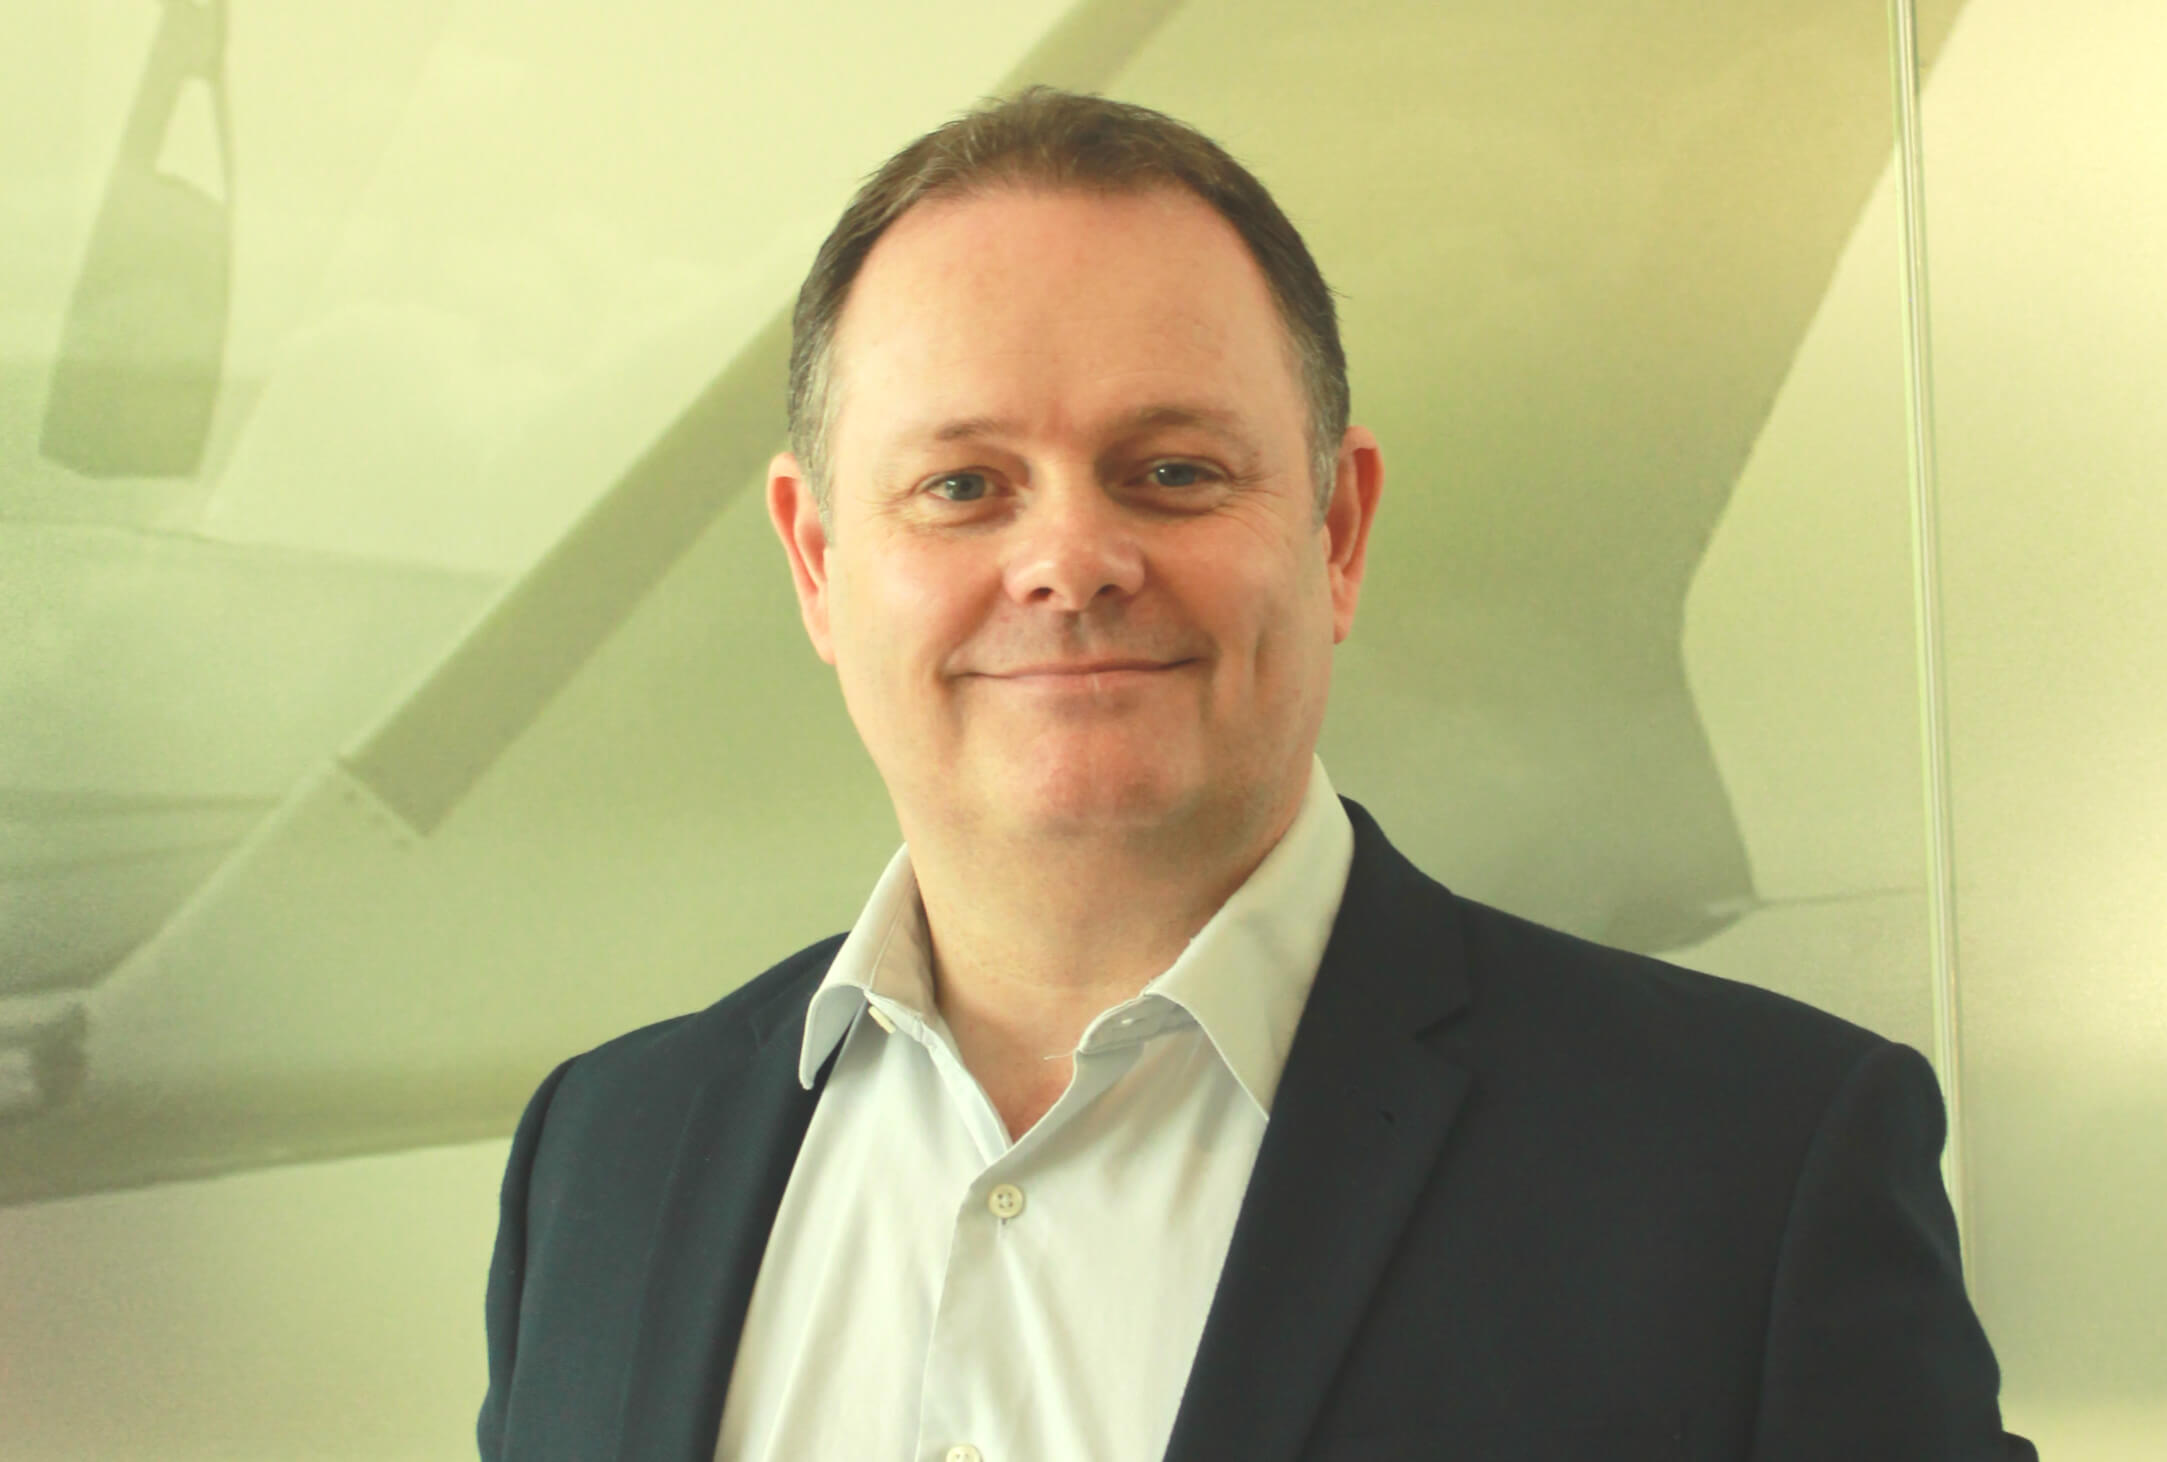 AJW Group appoints Andy Fleming as Head of Quality